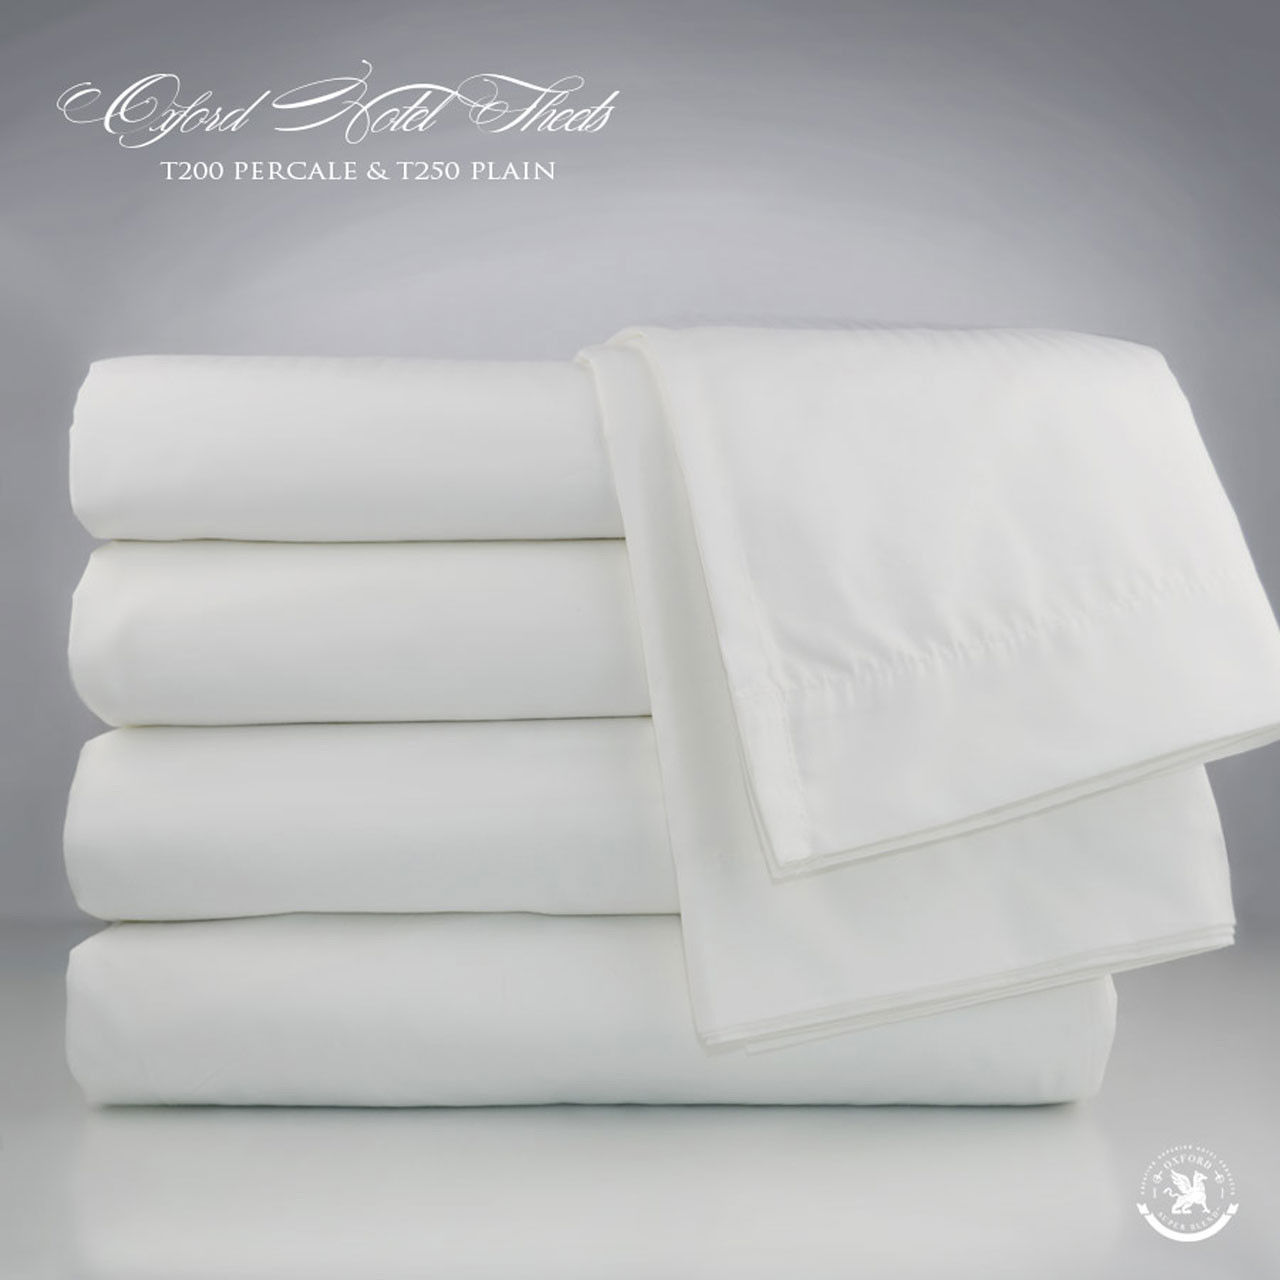 What is a good thread count for bed sheets?